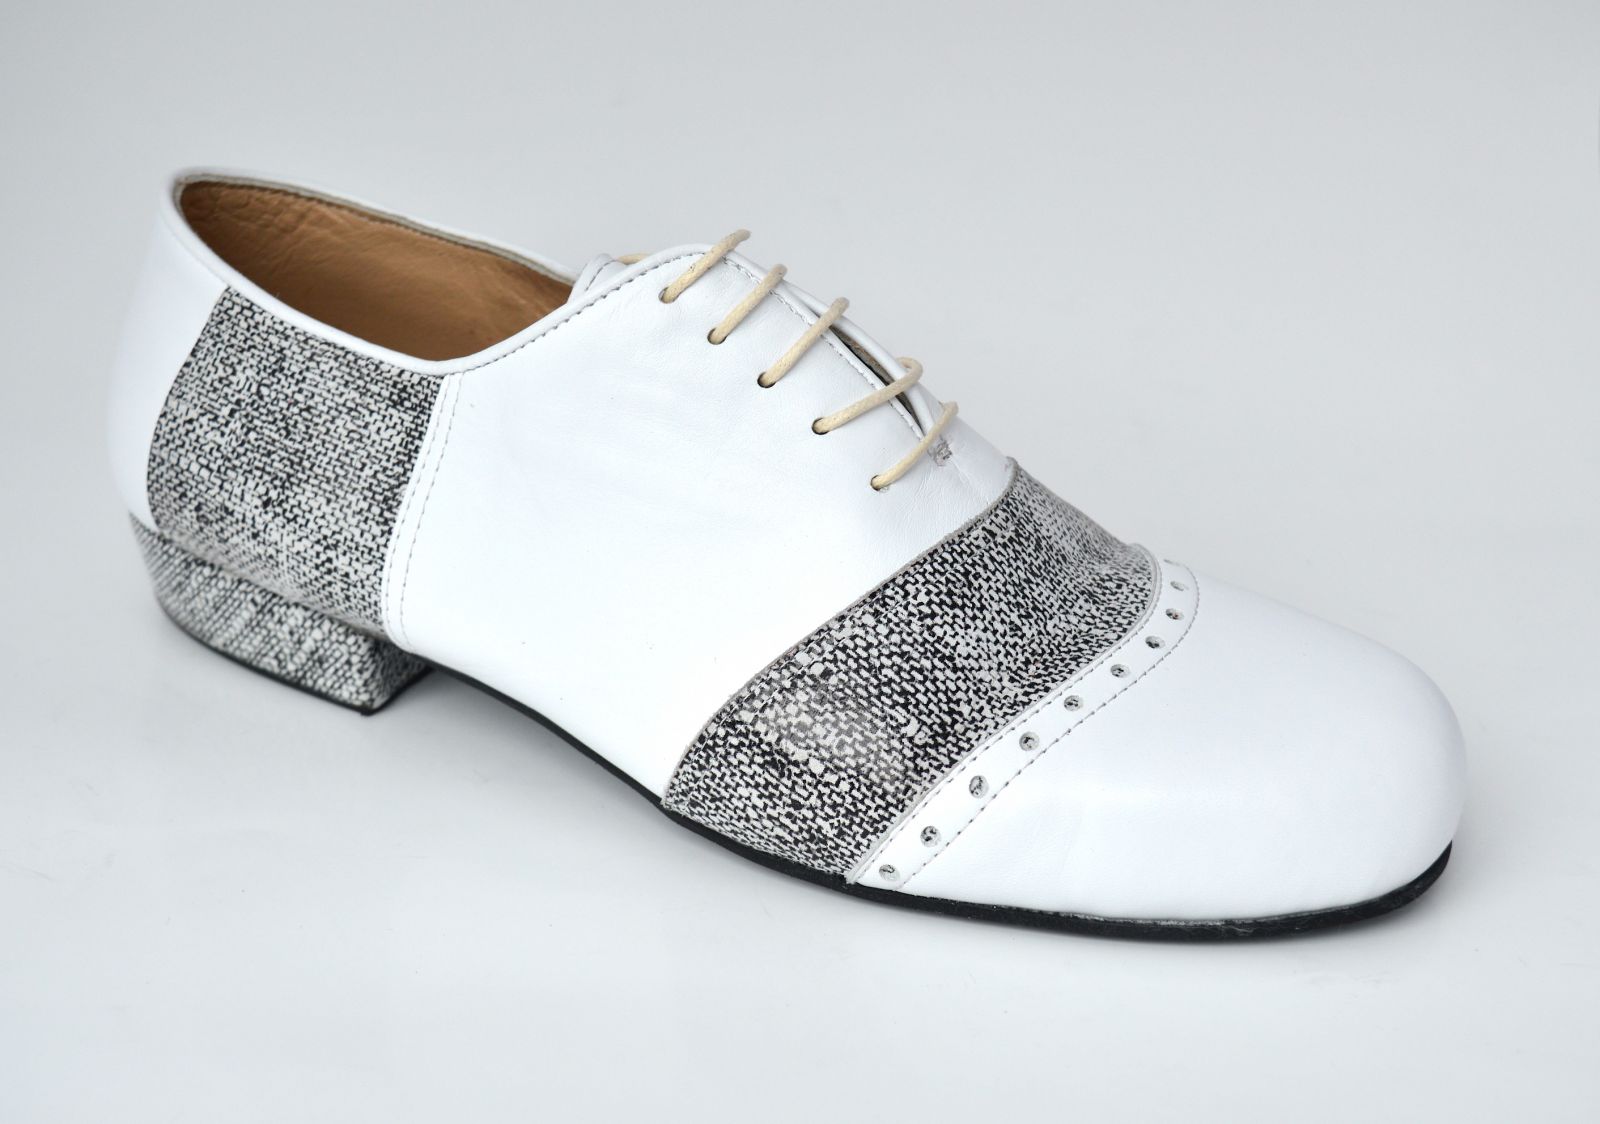 Men tango shoes by soft black leather and black-white leather